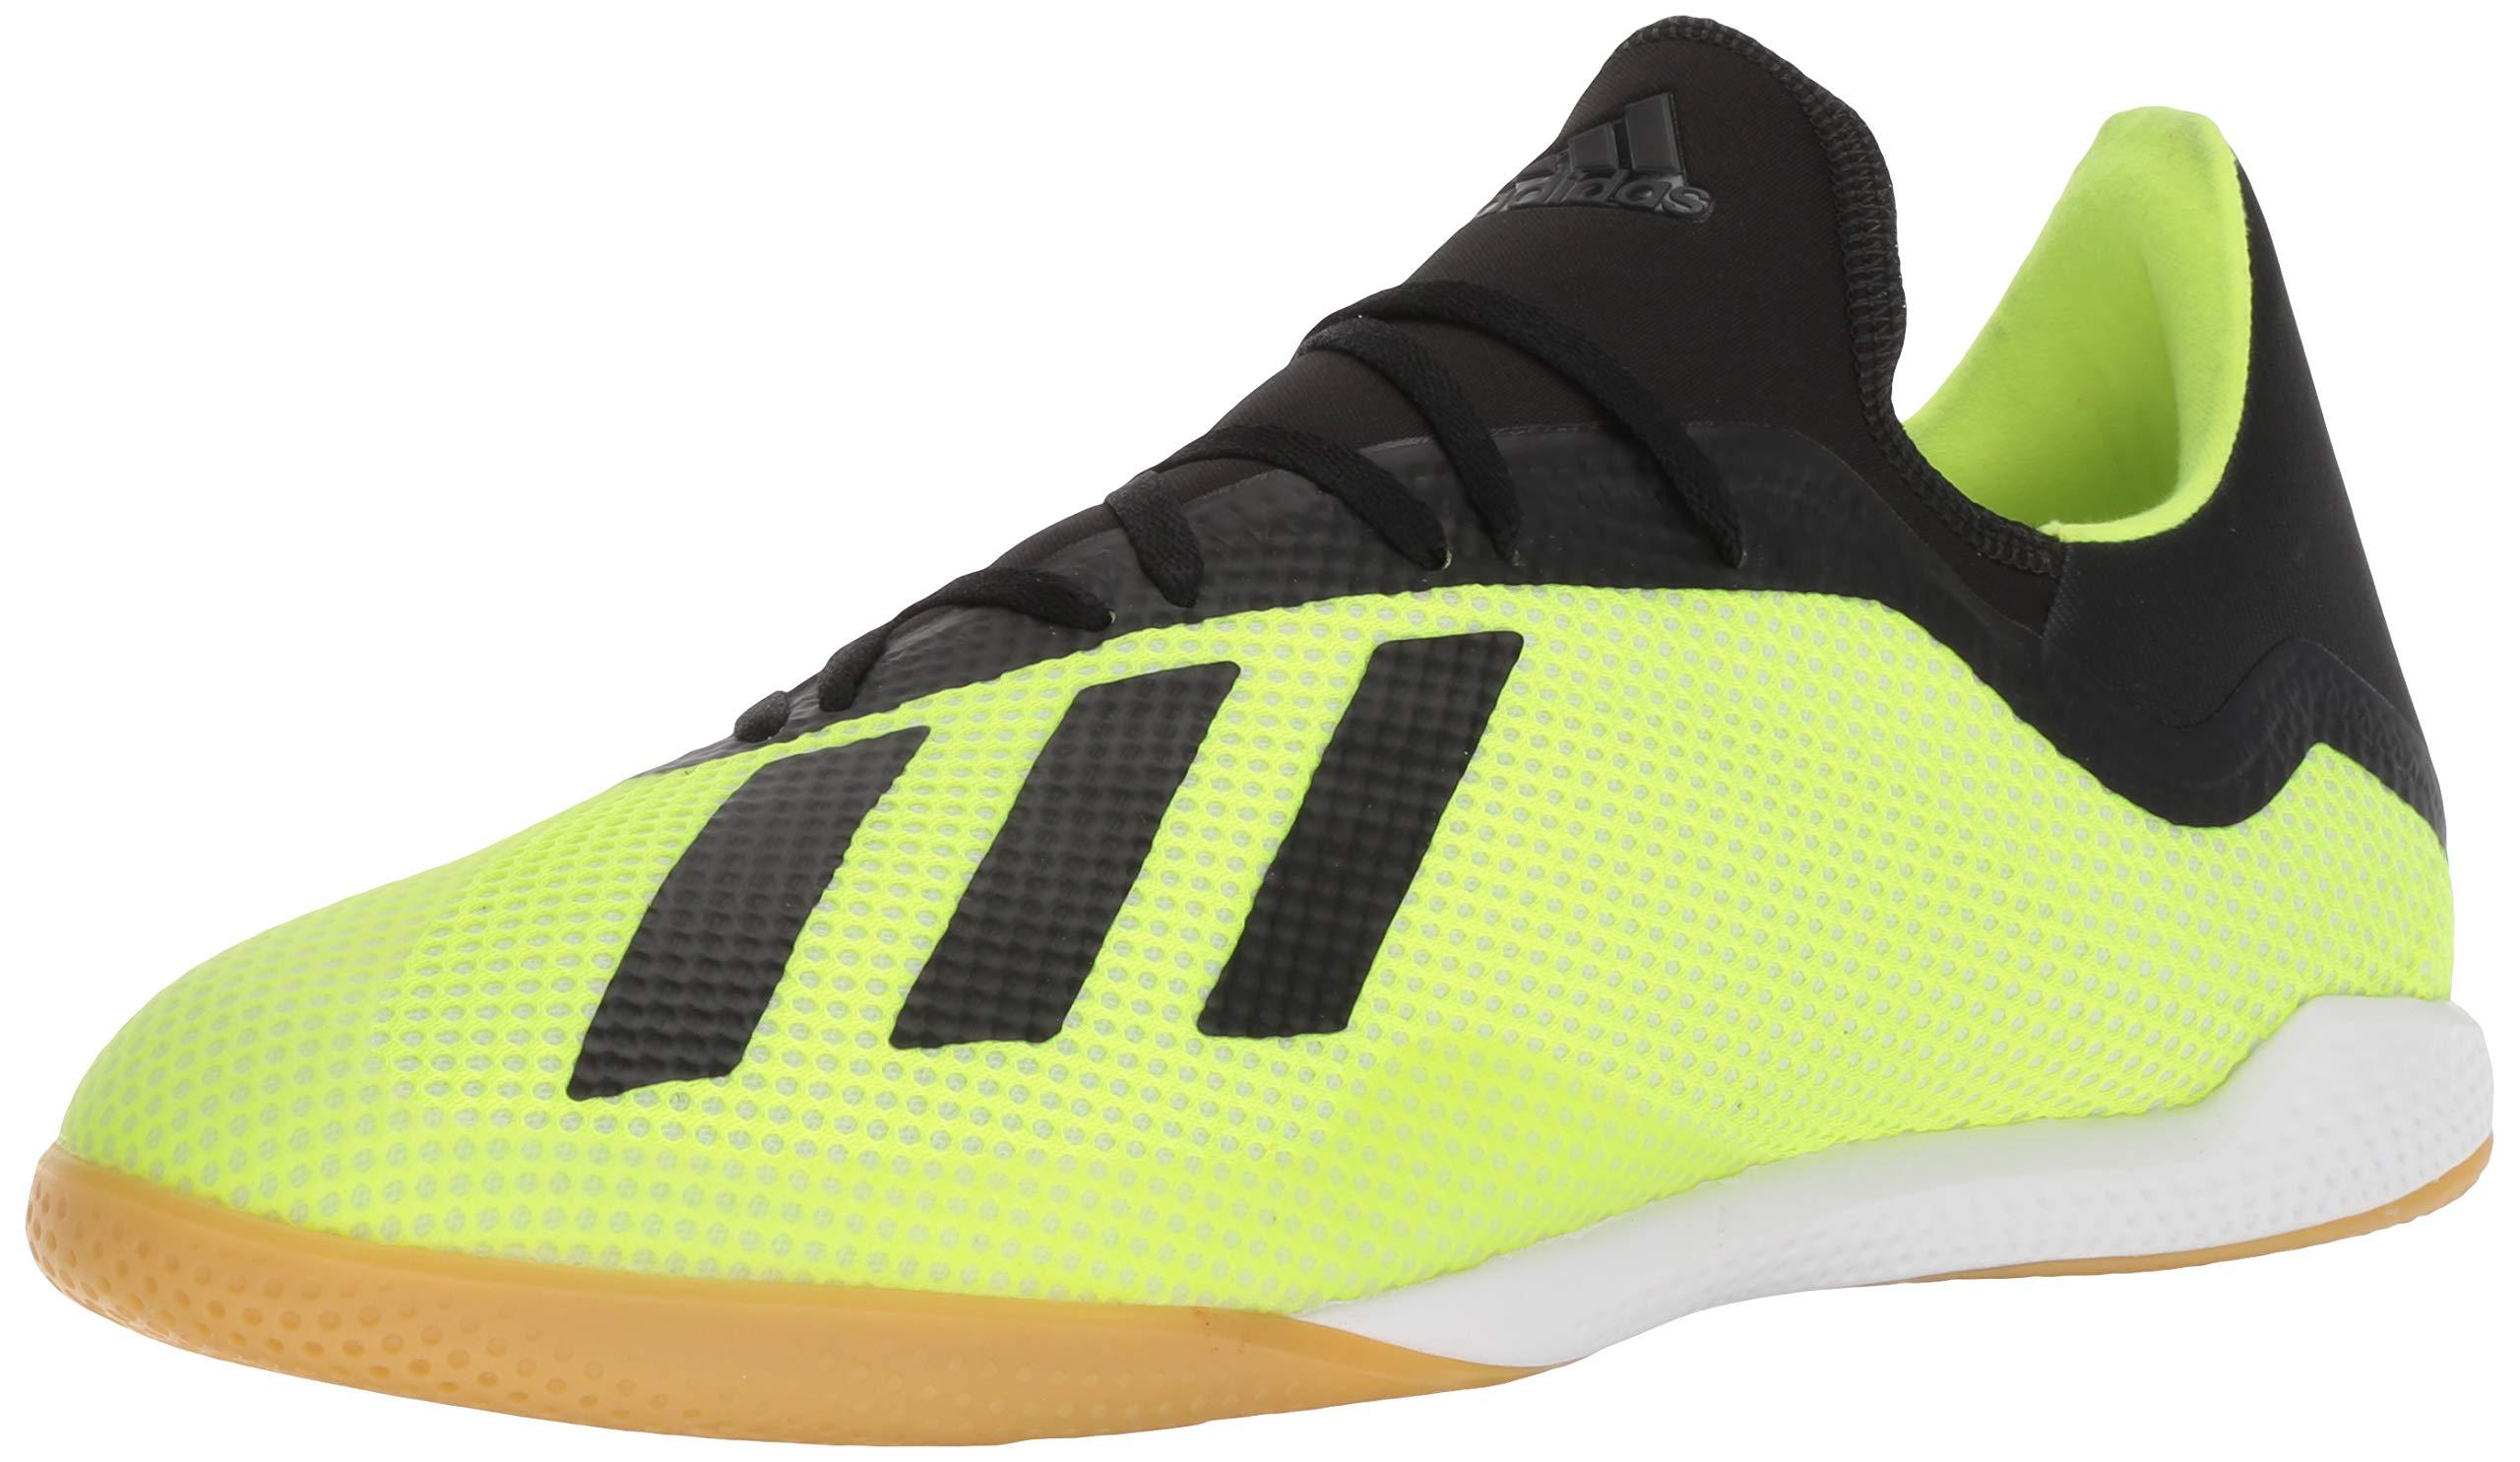 Adidas X Tango 18.3 Indoor Luxembourg, SAVE 47% - aveclumiere.com